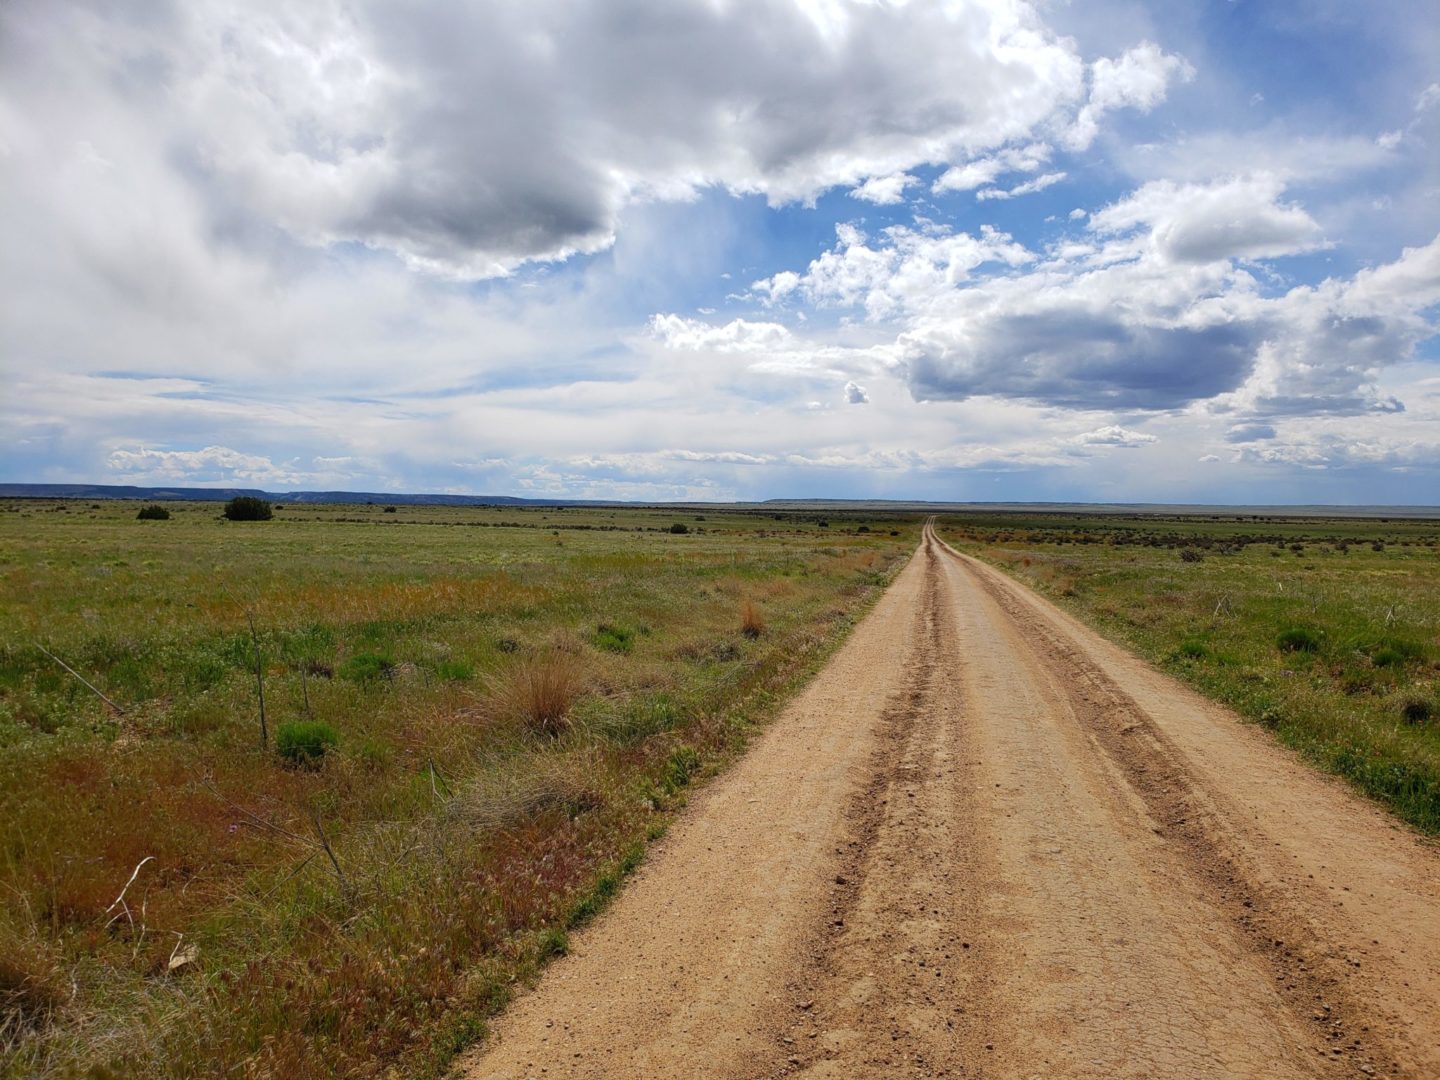 The long dirt roads through the Comanche Grasslands from the trailhead